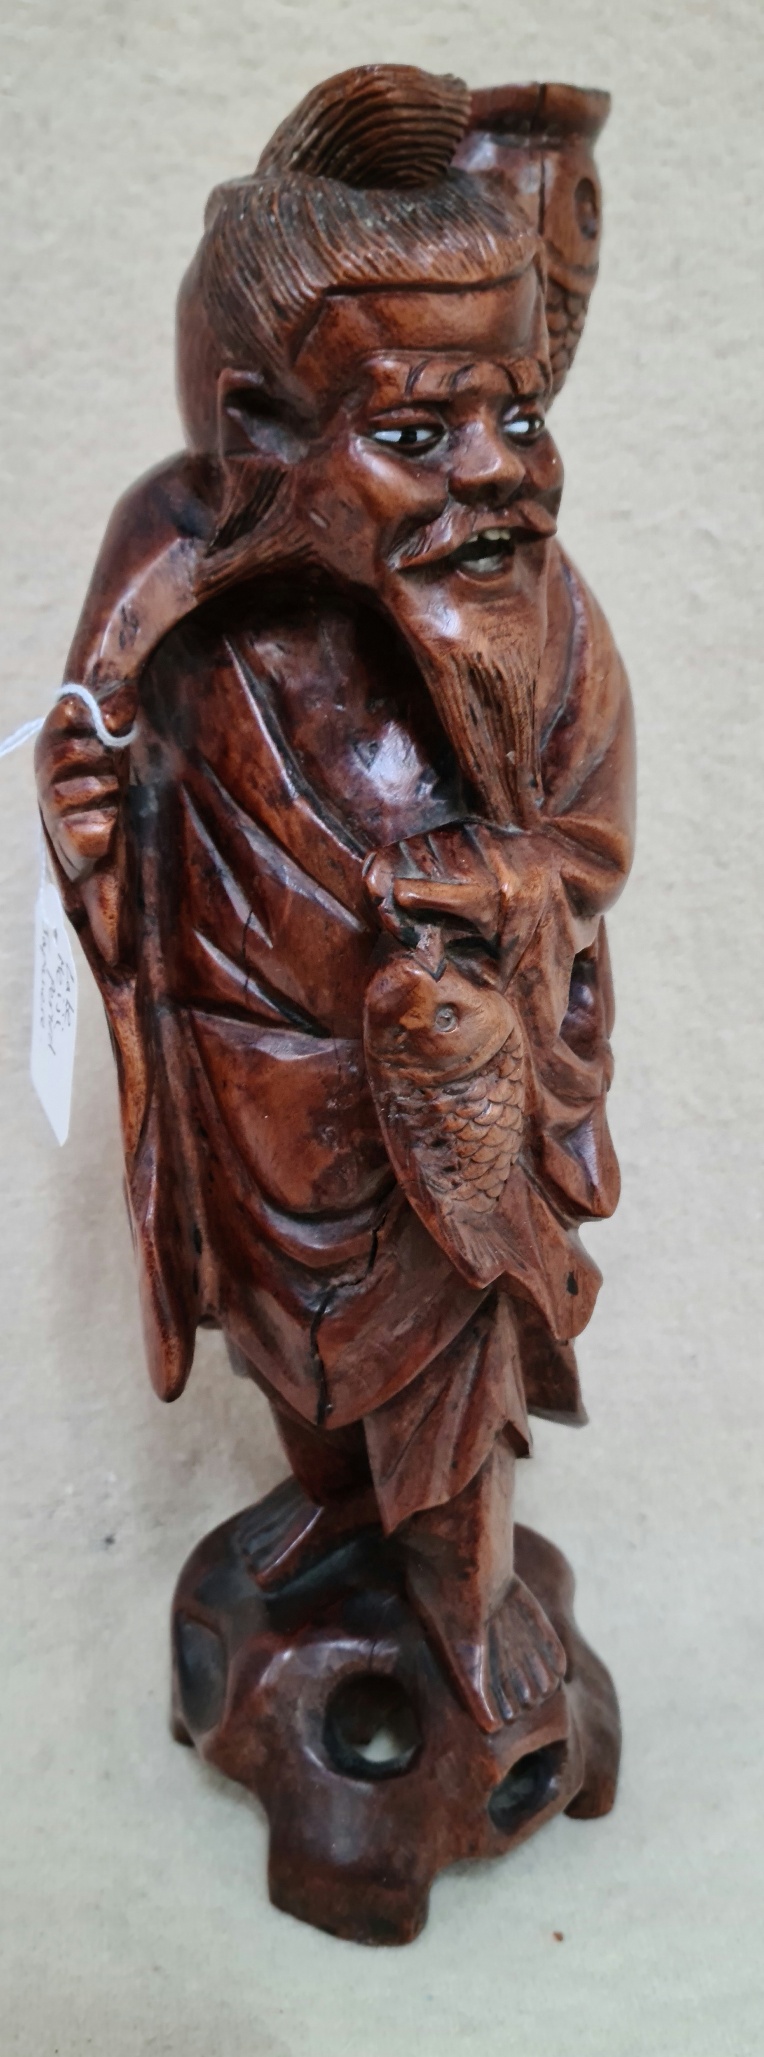 A Japanese late Meiji period wood carving of a fisherman, height 35.5cm.